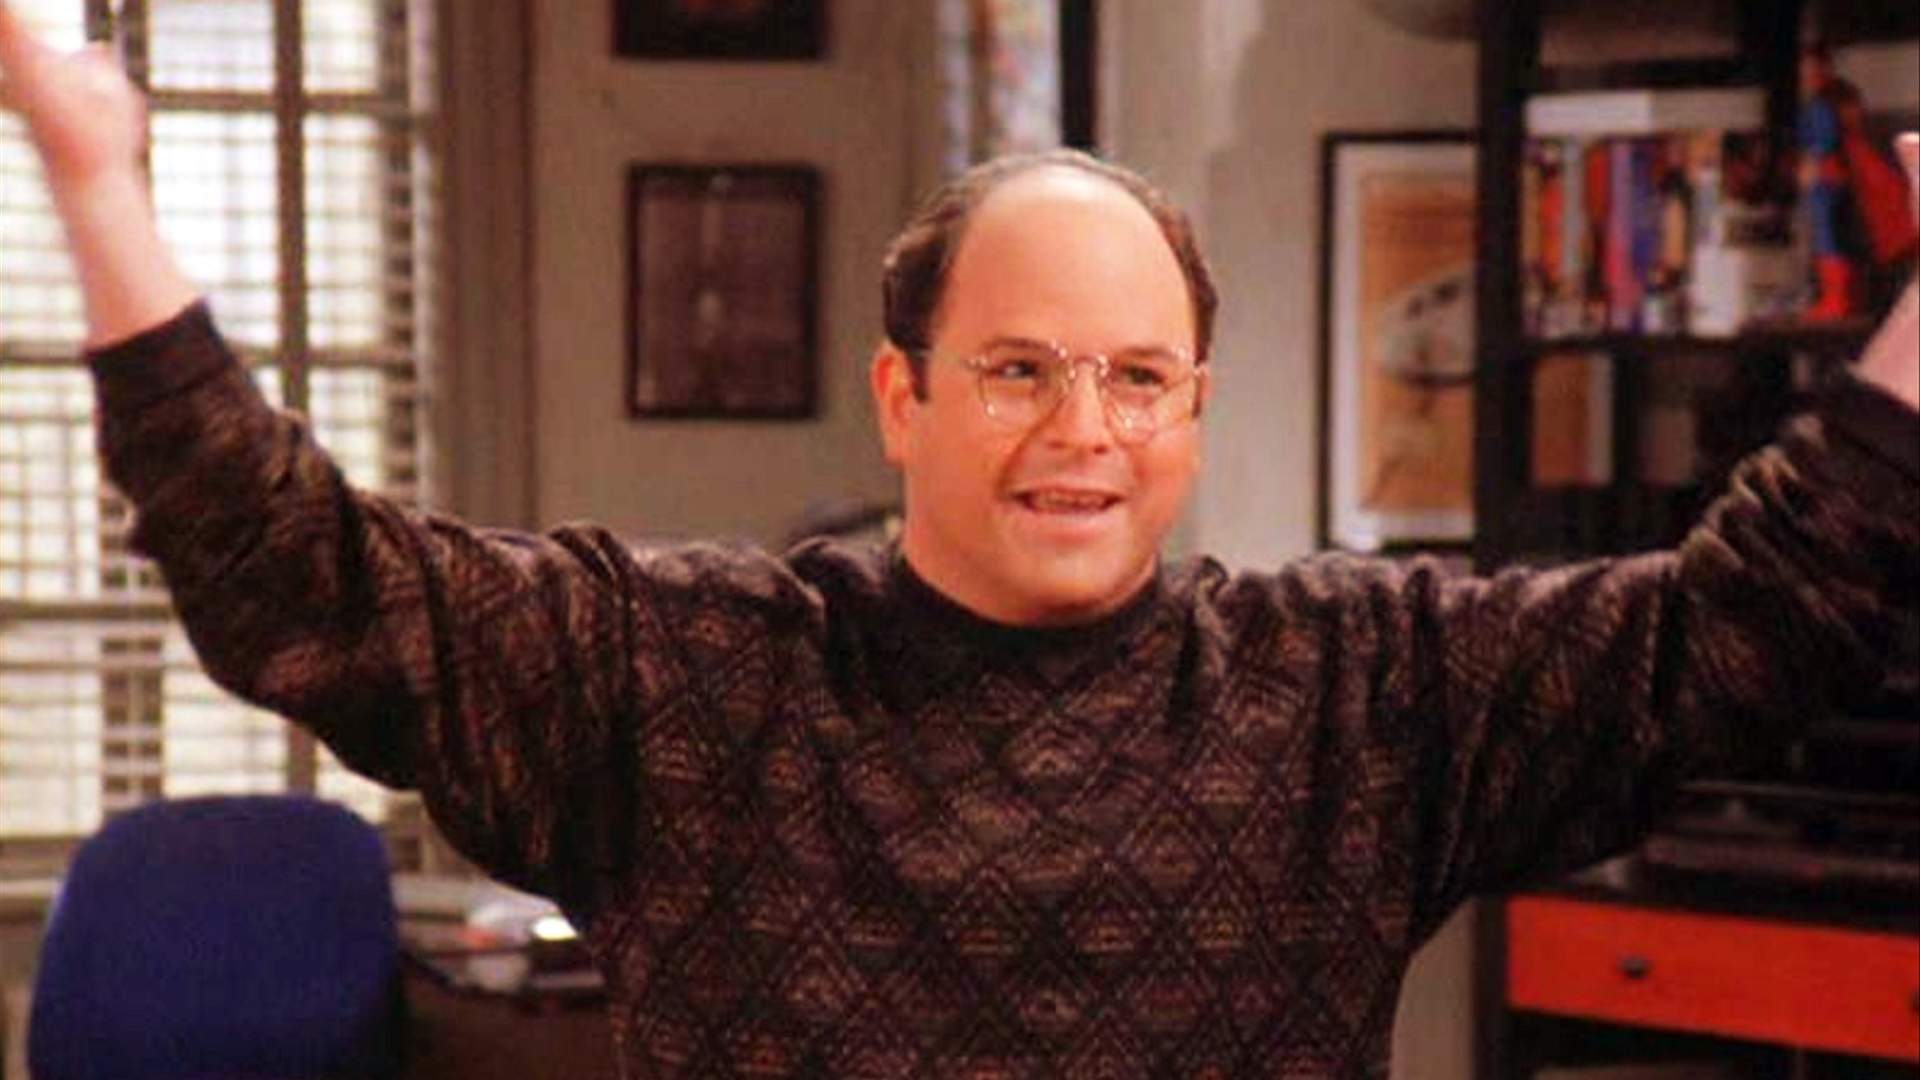 Australia Has Just Scored Its First George Costanza Themed Bar